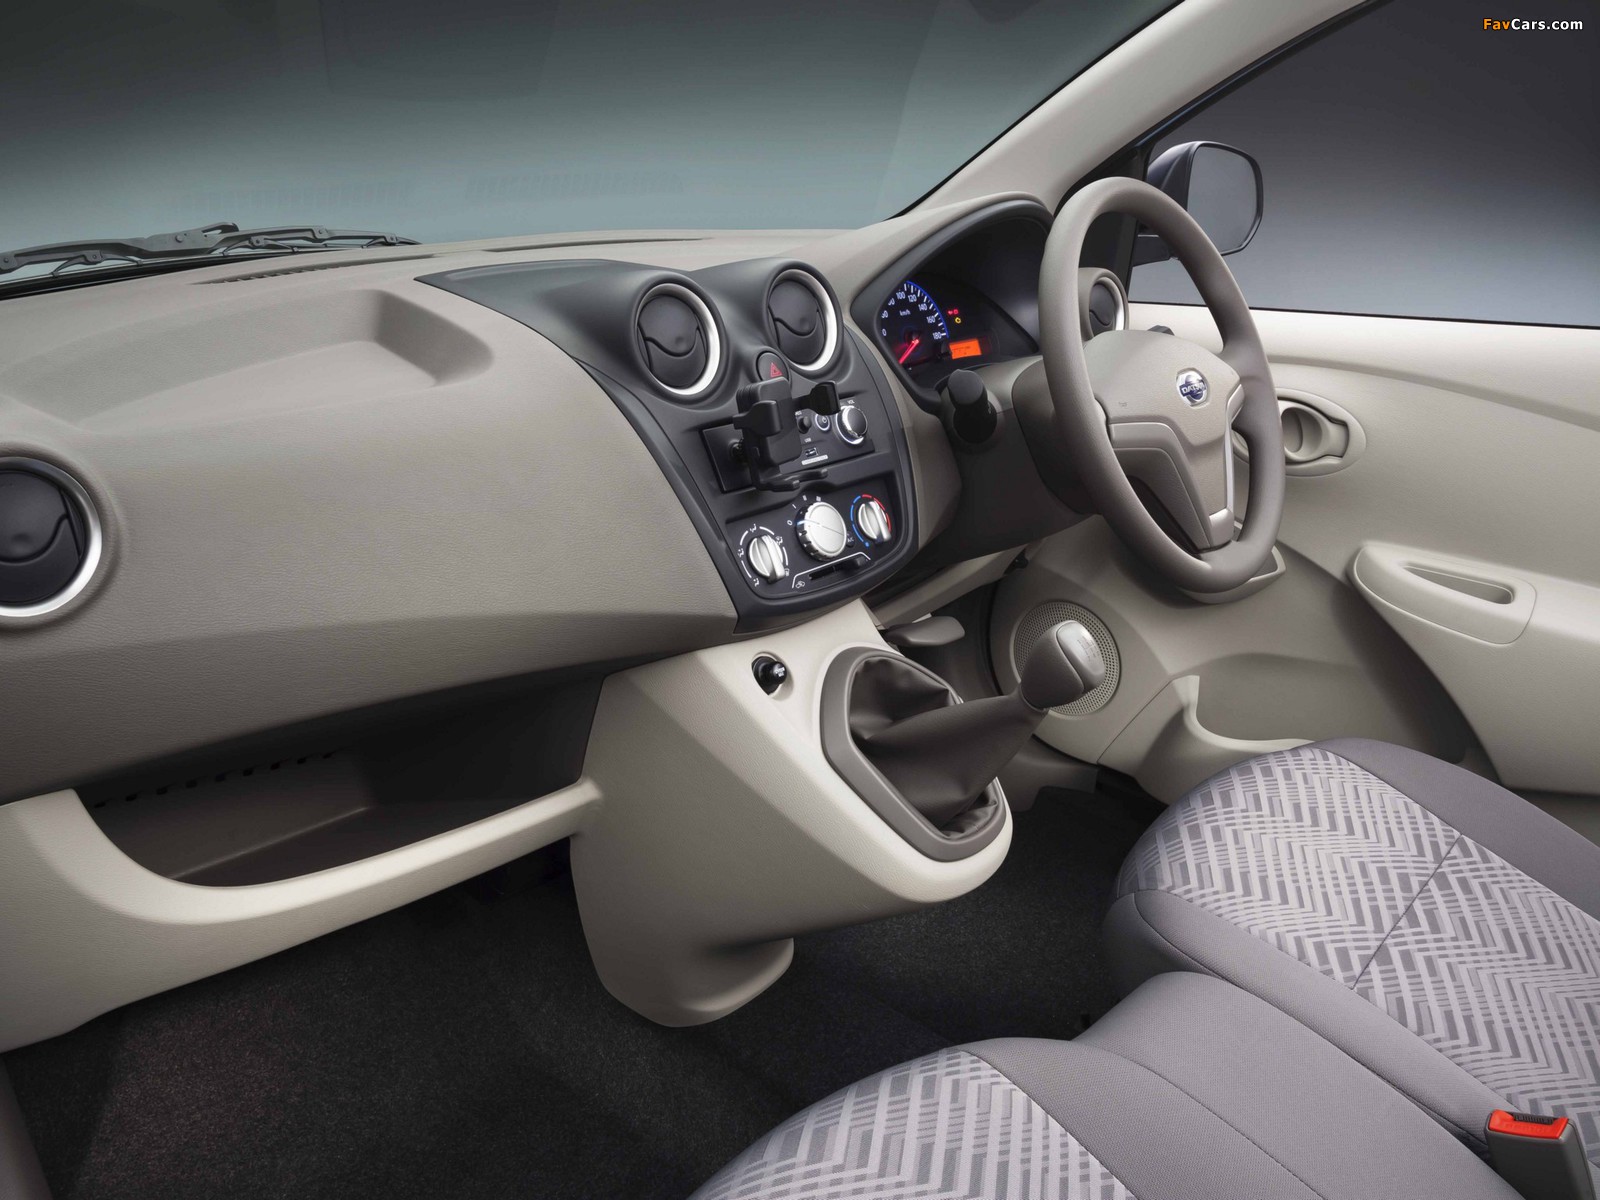 Images of Datsun GO 2014 (1600 x 1200)